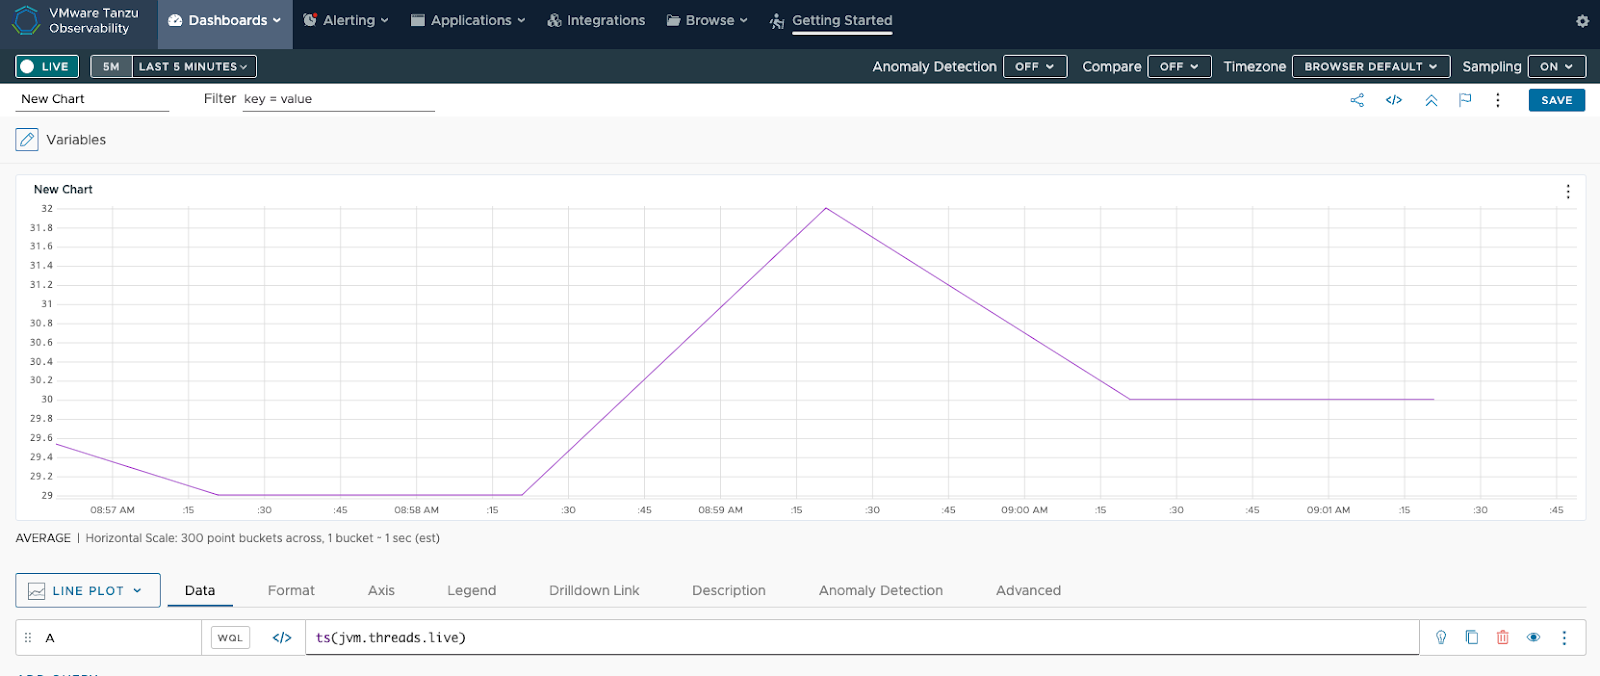 A screenshot showing the chart data when you query for ts(jvm.threads.live).